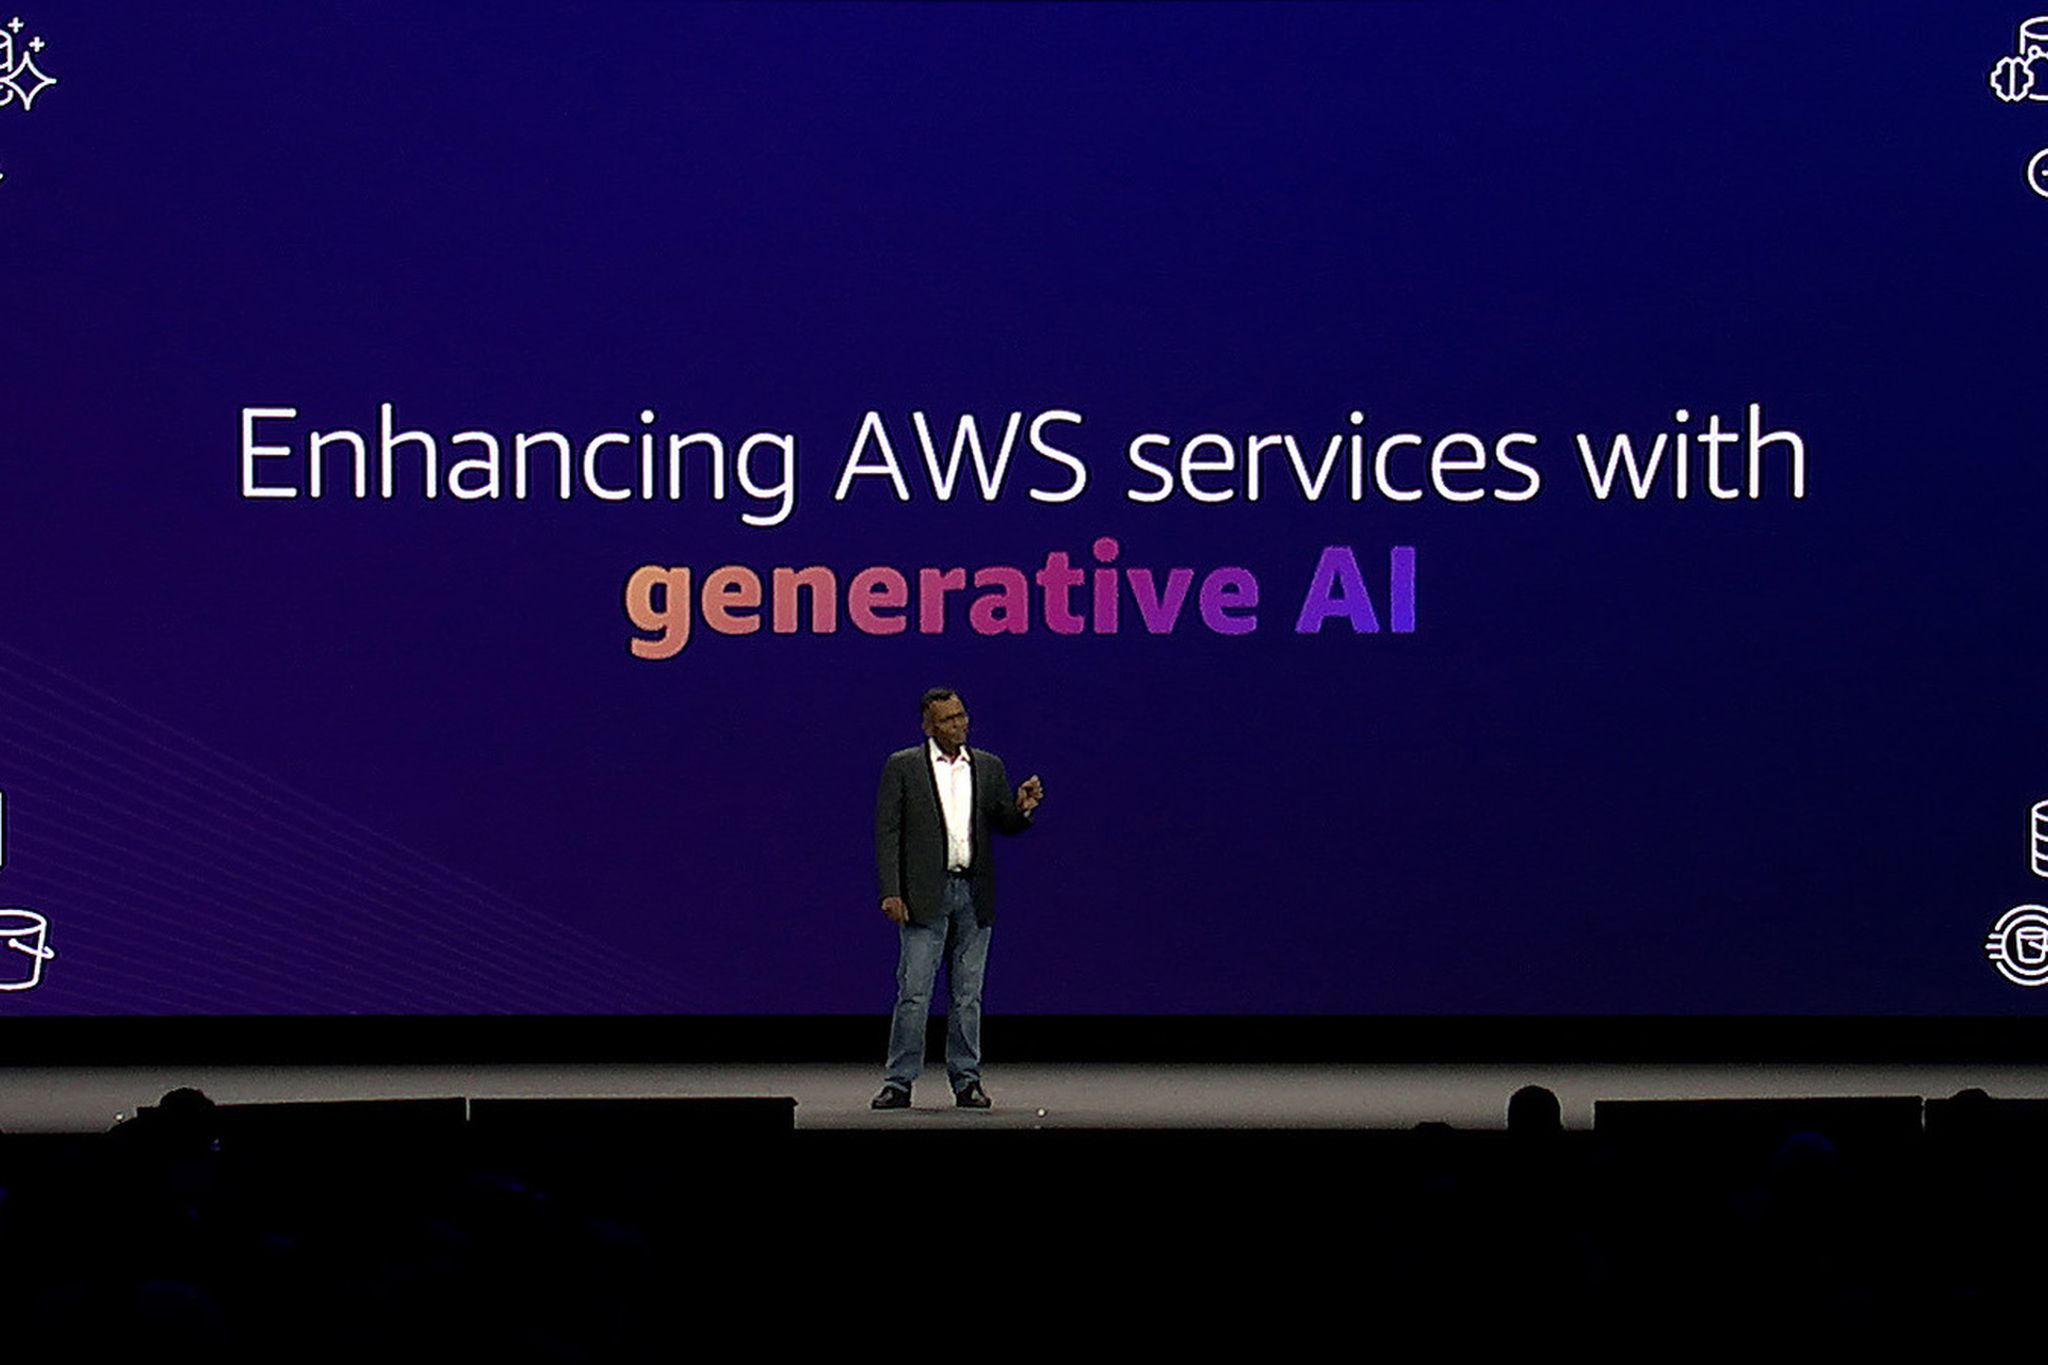 AWS is ready to power AI agents that can handle busywork instead of